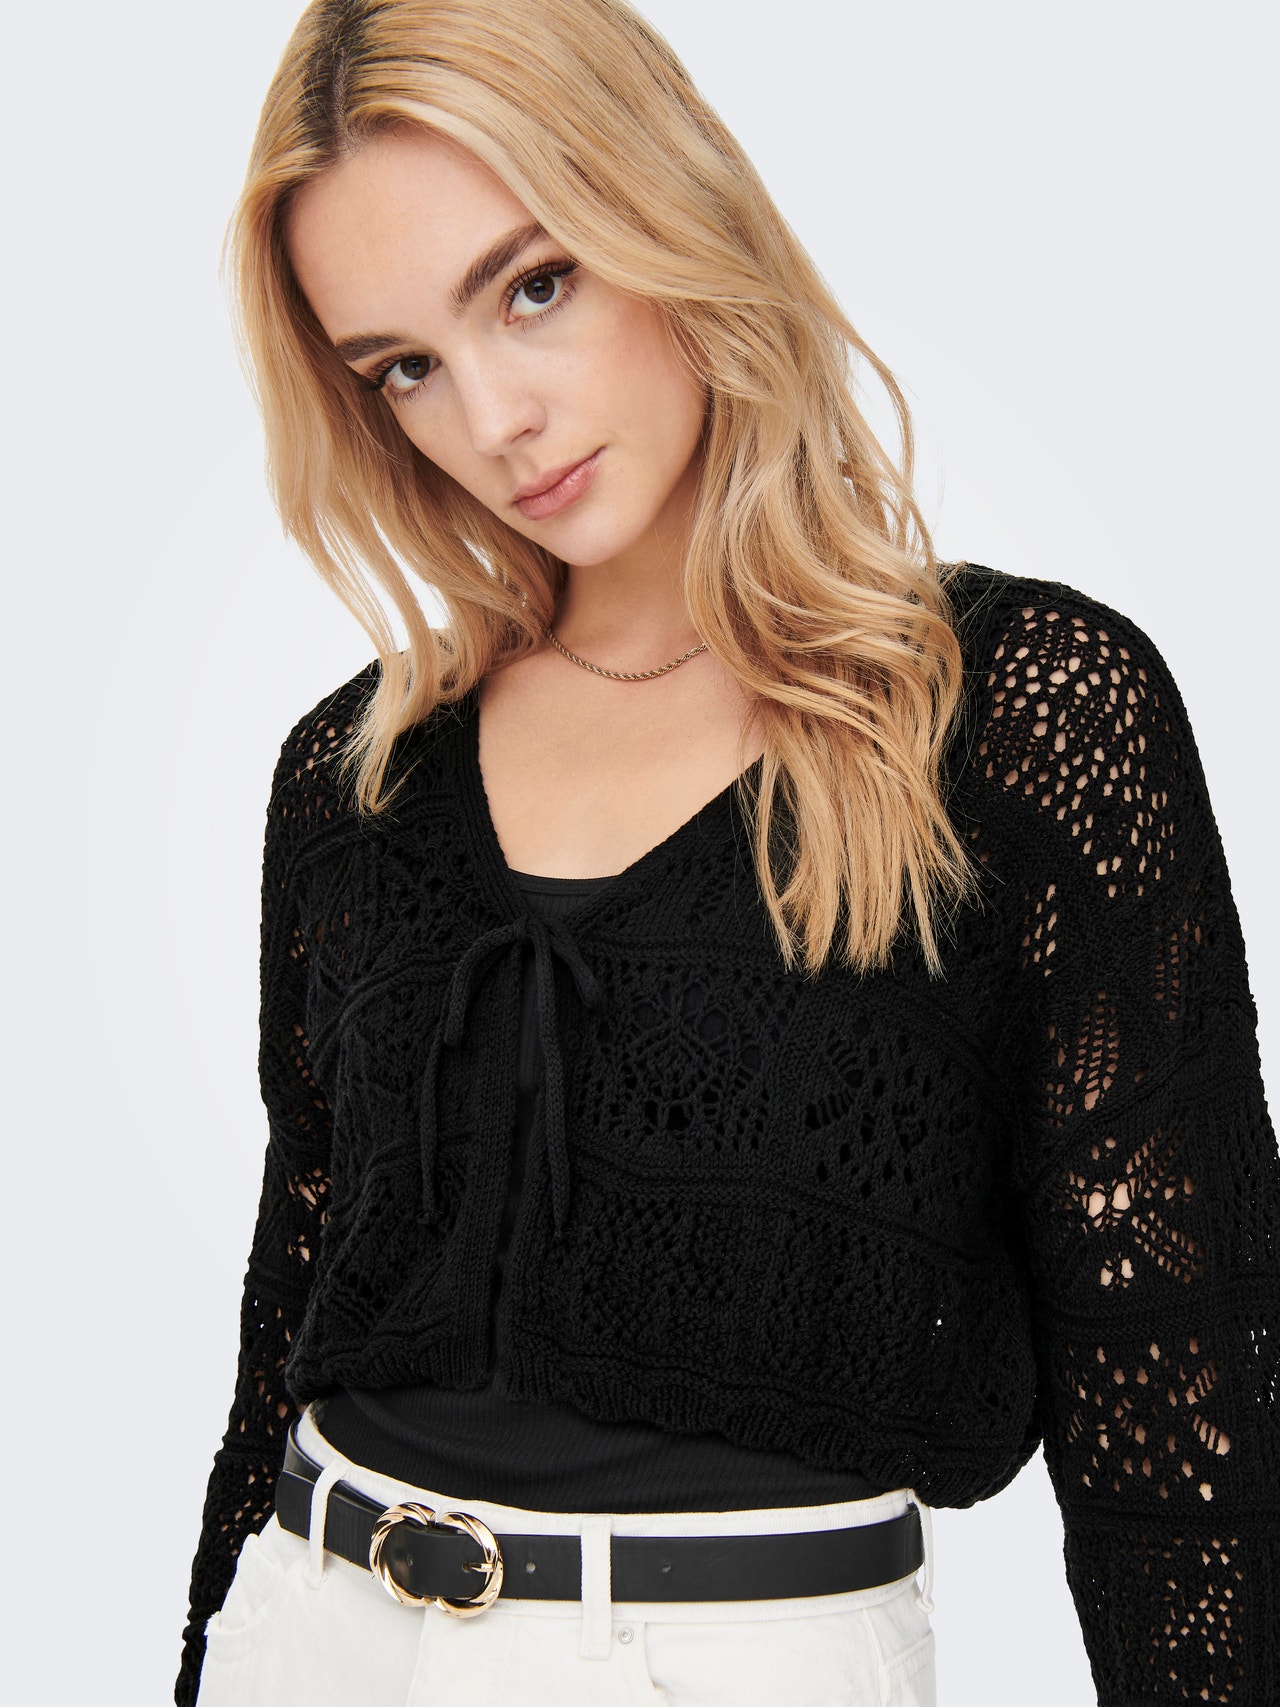 ONLY 7/8 sleeved Knitted Cardigan -Black - 15257604